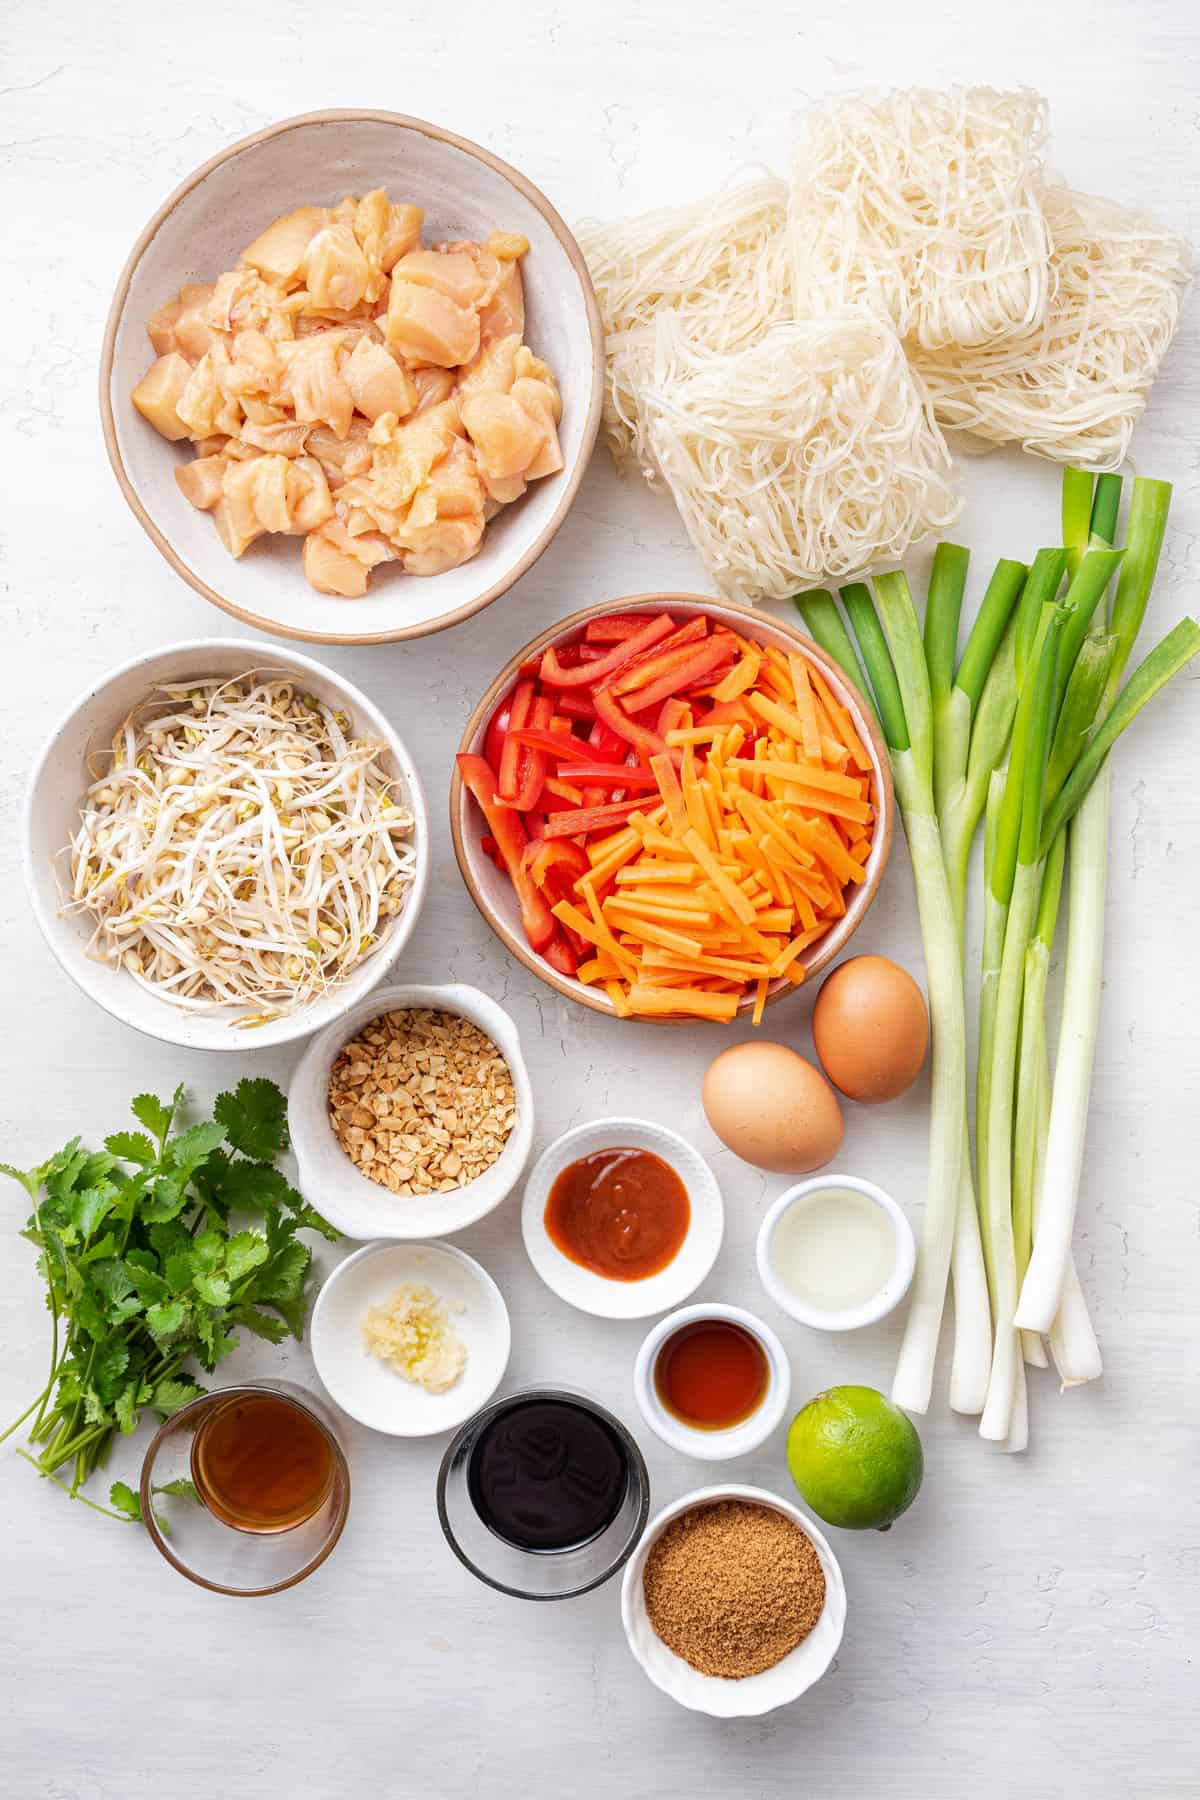 Overhead view of the ingredients needed for chicken pad thai: a bowl of cubed chicken breasts, a bowl of bean sprouts, a bowl of sliced carrots and red bell peppers, four blocks of pad thai noodles, some green onions, two eggs, a bowl of chopped peanuts, a bowl of sriracha, a bowl of chopped garlic, a bowl of soy sauce, a bowl of fish sauce, a bowl of sesame oil, a bowl of vinegar, a bowl of coconut sugar, two eggs, a lime, and a bunch of cilantro